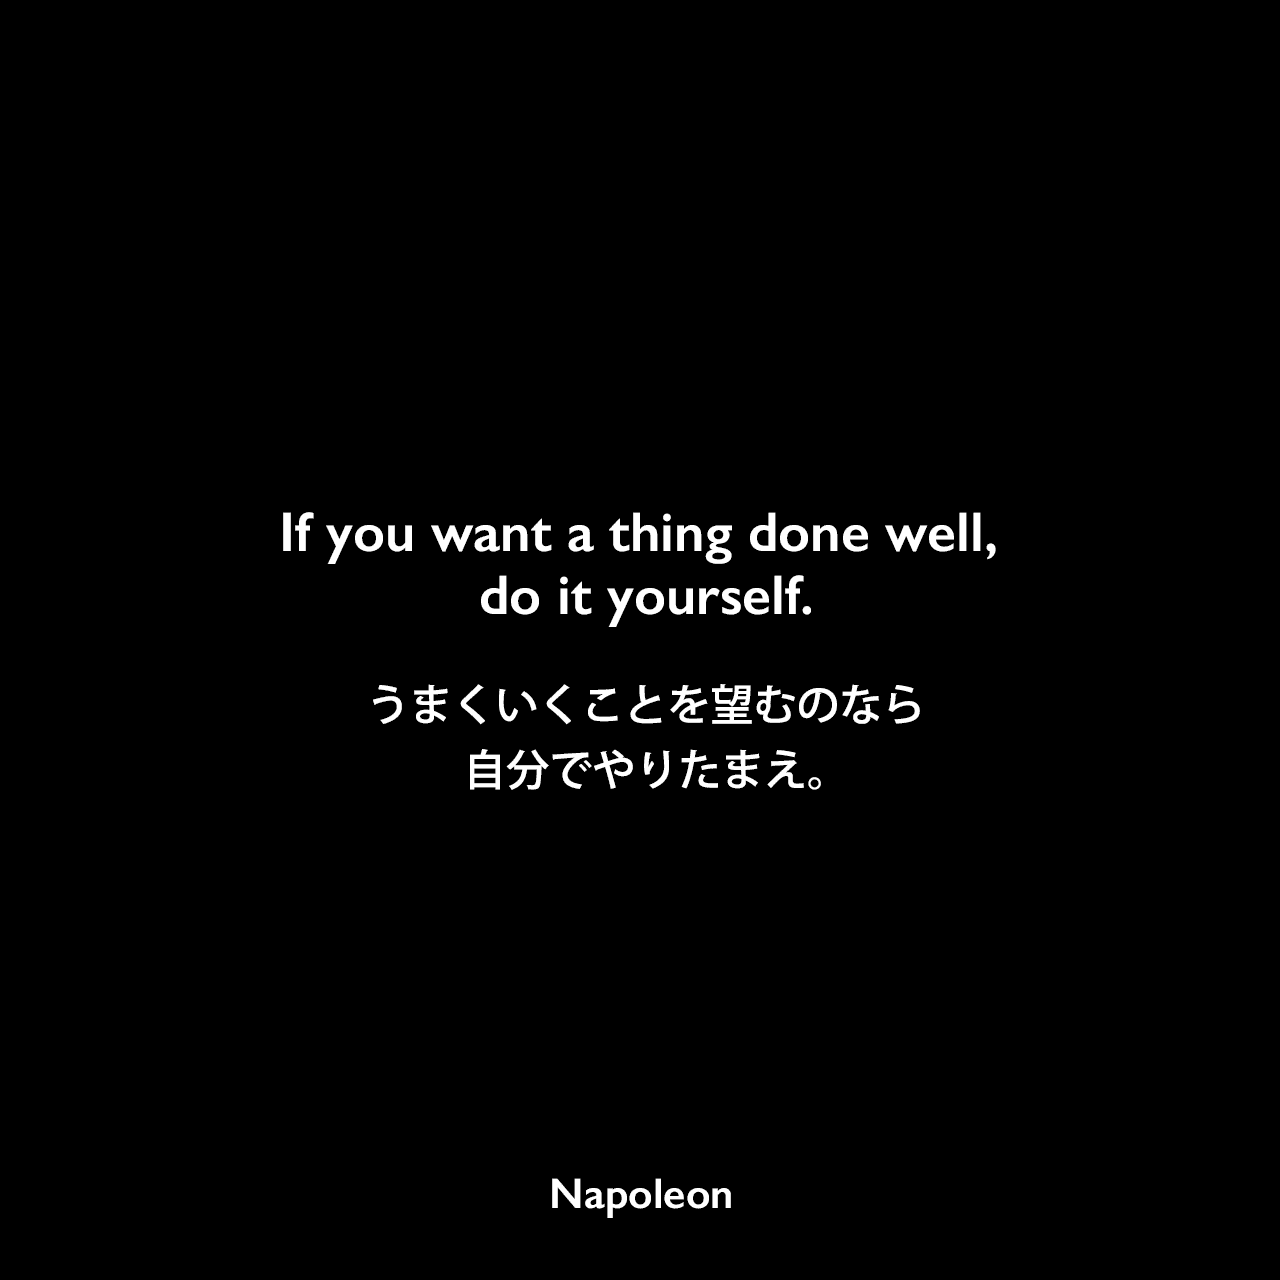 If you want a thing done well, do it yourself.うまくいくことを望むのなら自分でやりたまえ。Napoleon